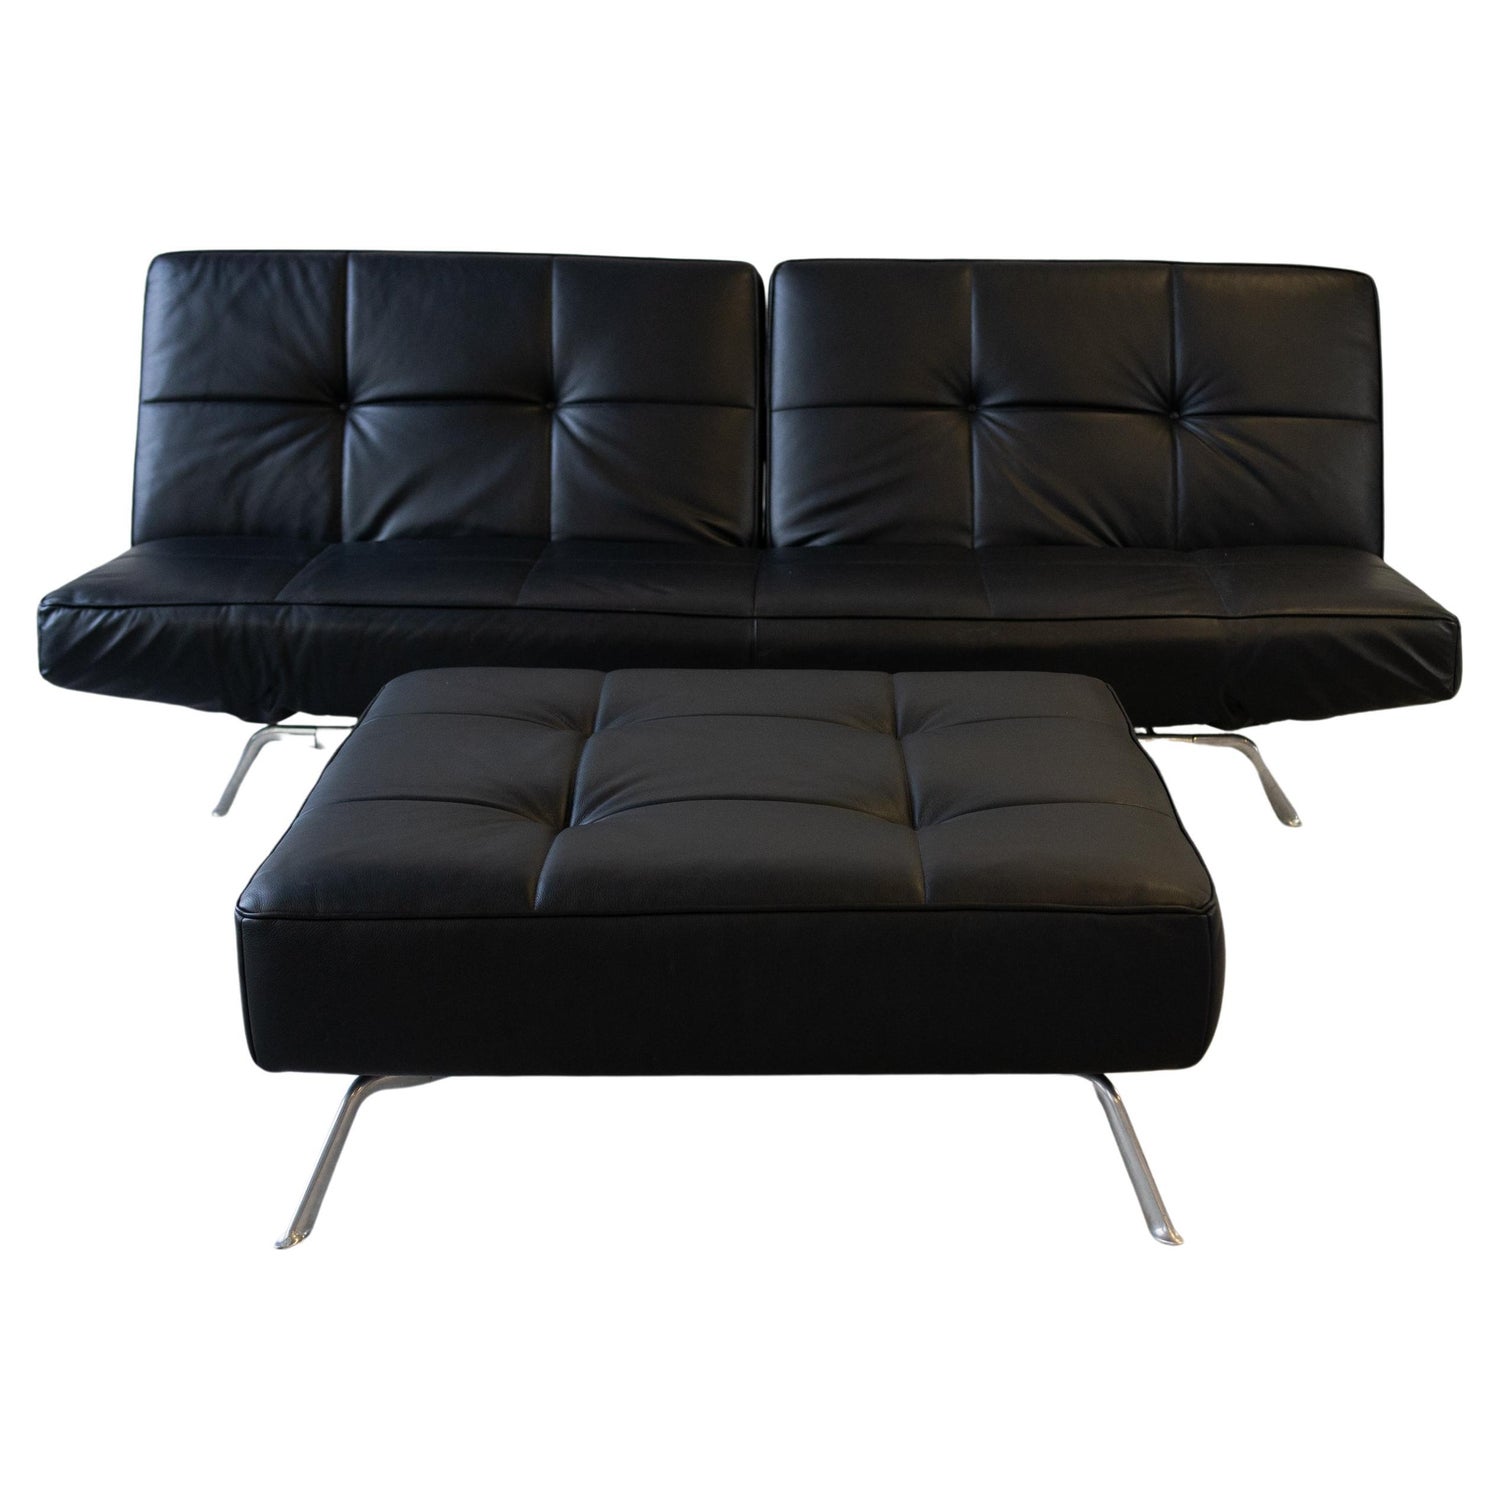 Olivier Mourgue sofa For Sale at 1stDibs